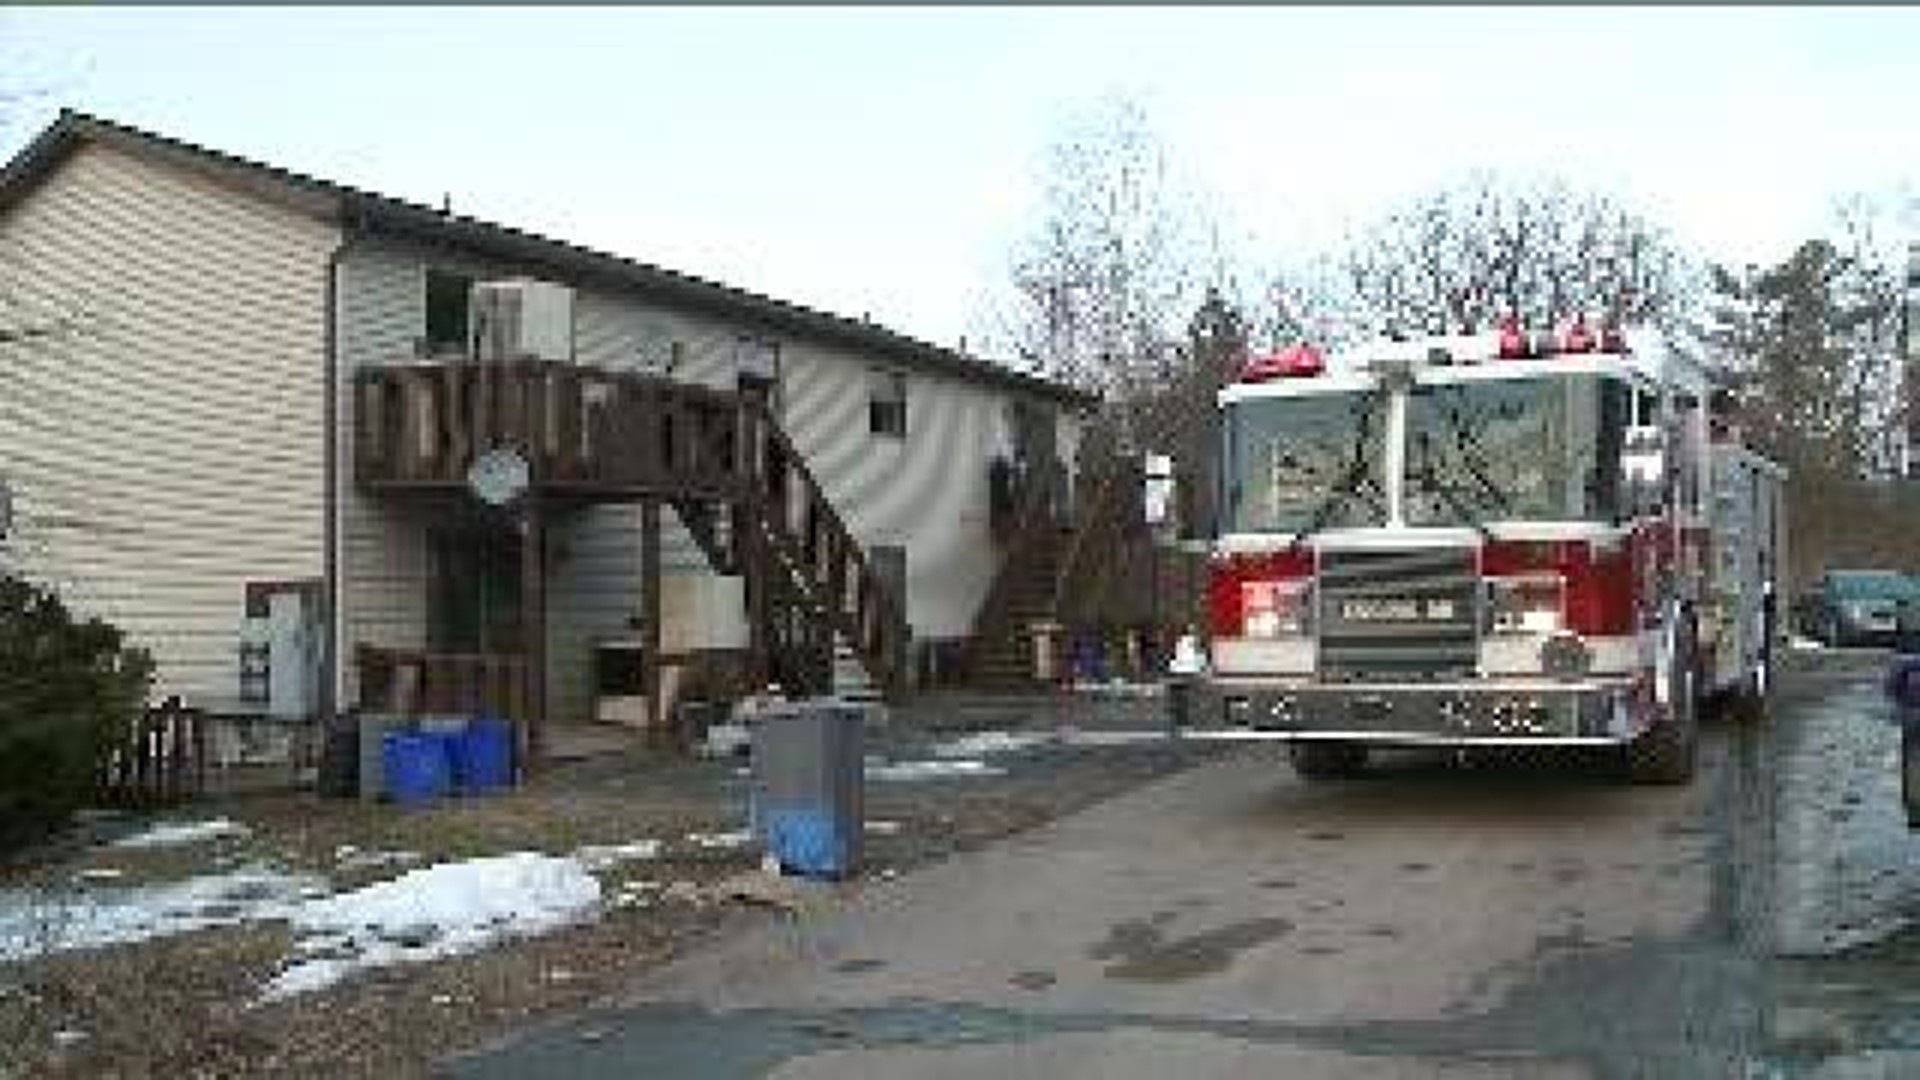 Firefighters: Electrical Issue Sparked Flames in Apartment